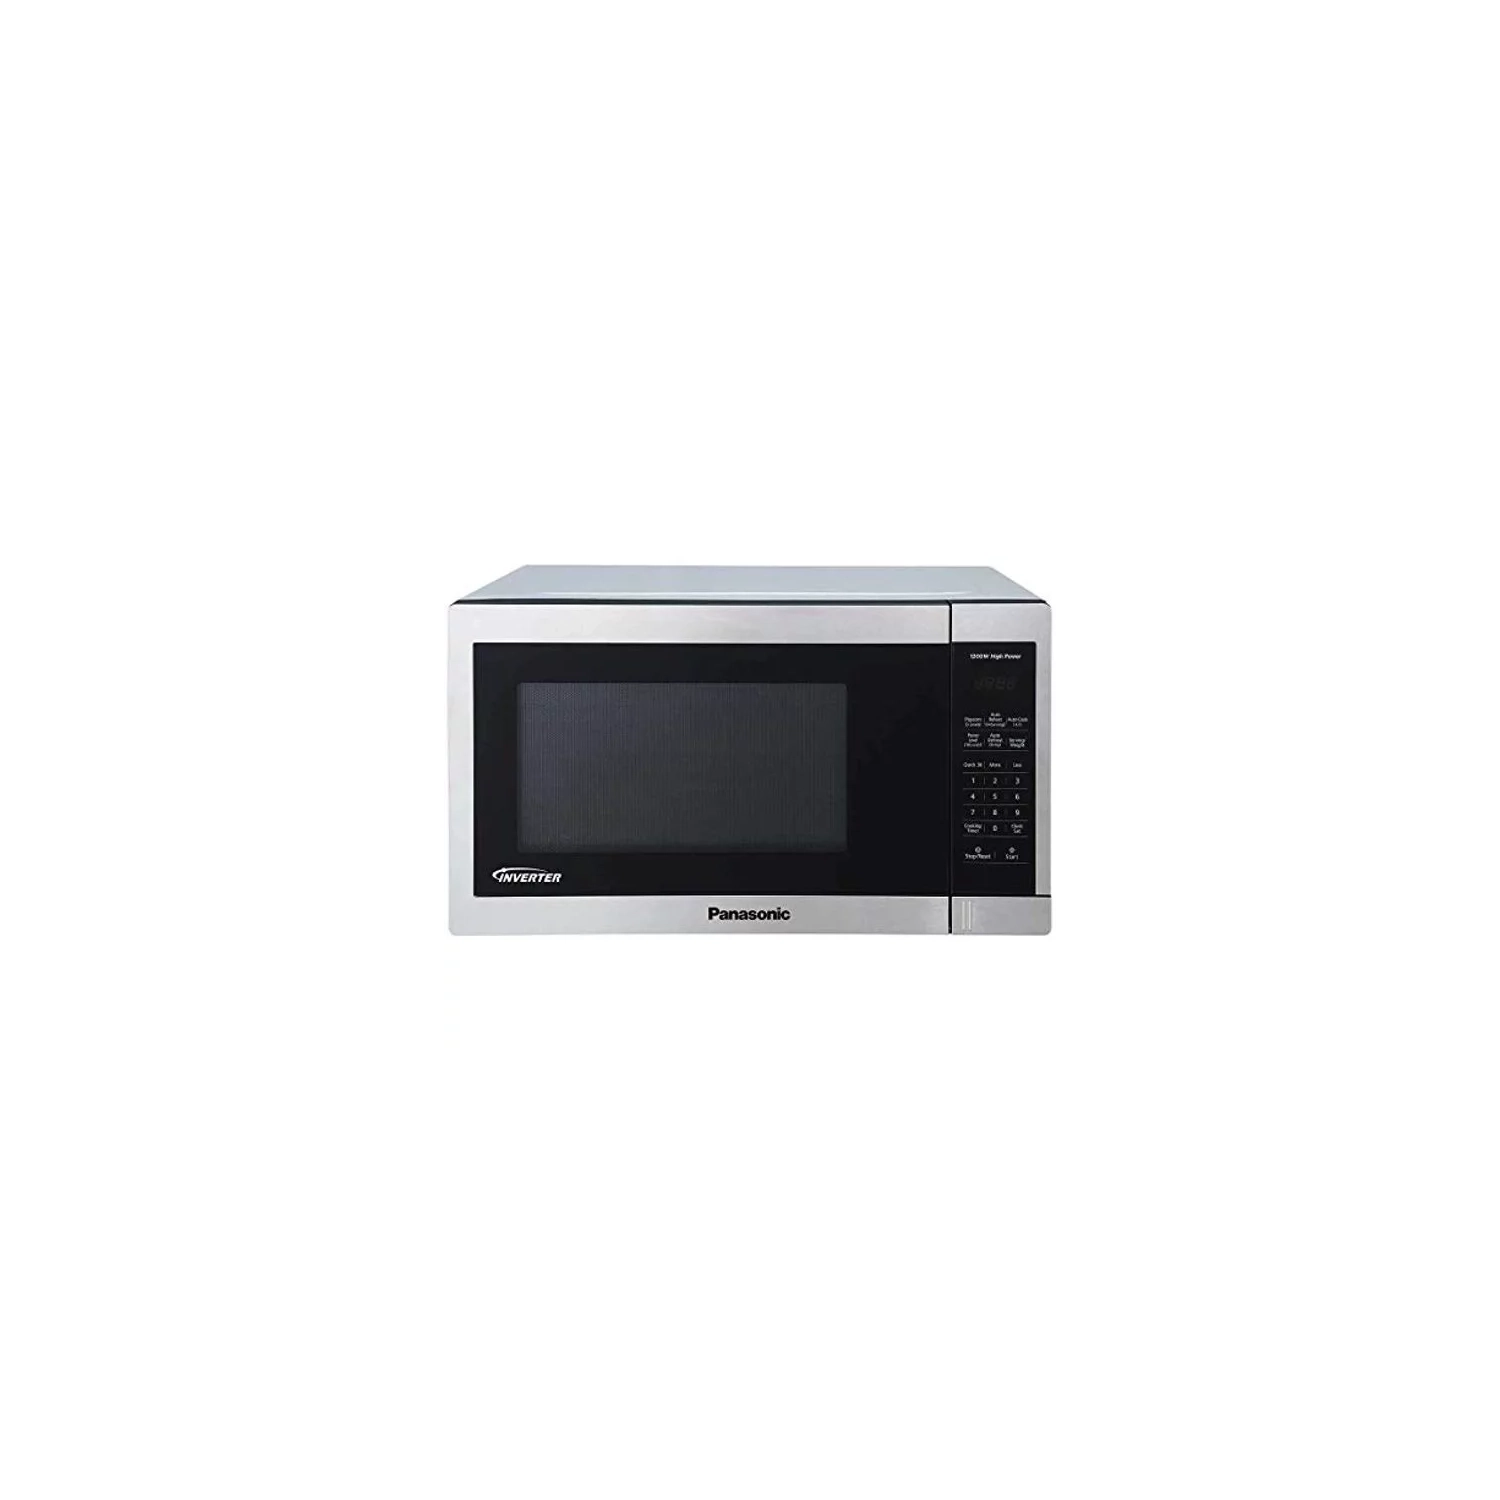 Panasonic NN-SC668S 1.3CuFt Stainless Steel Countertop Microwave Oven (Refurbished) Good